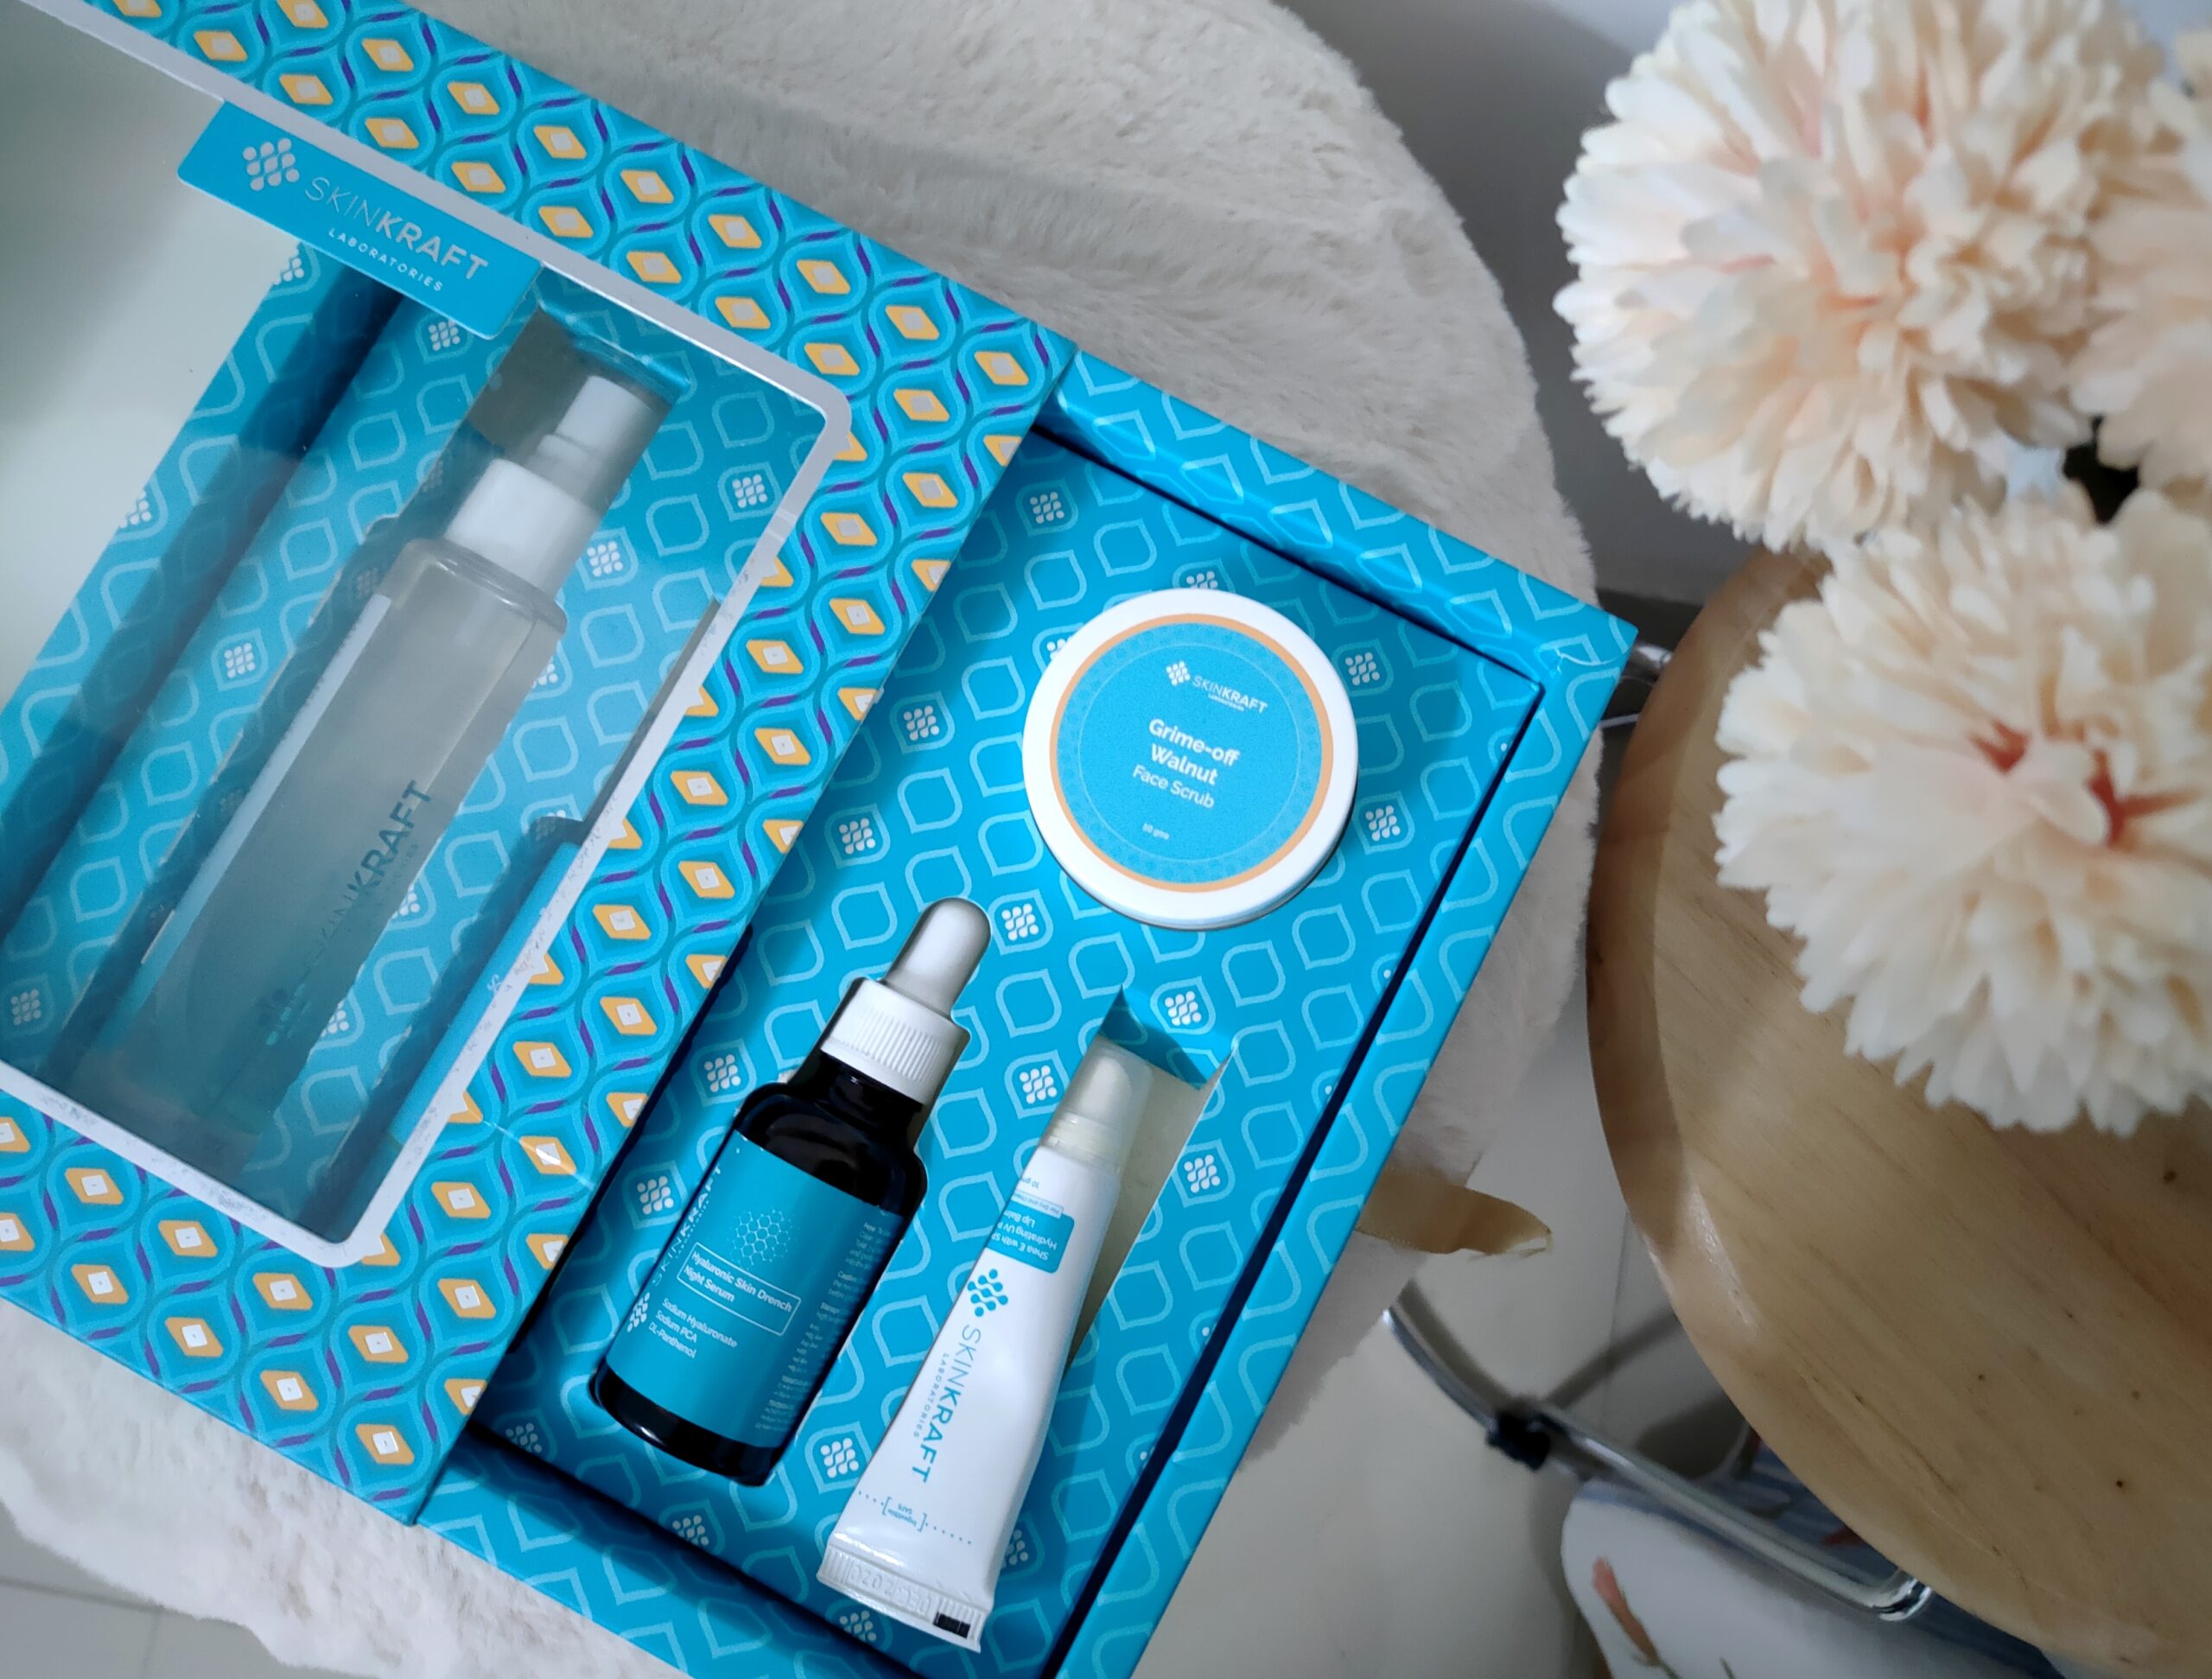 Restore the Festive Glow With SkinKraft Skincare Limited Edition Essential Face Care Kit- #TriedandTested